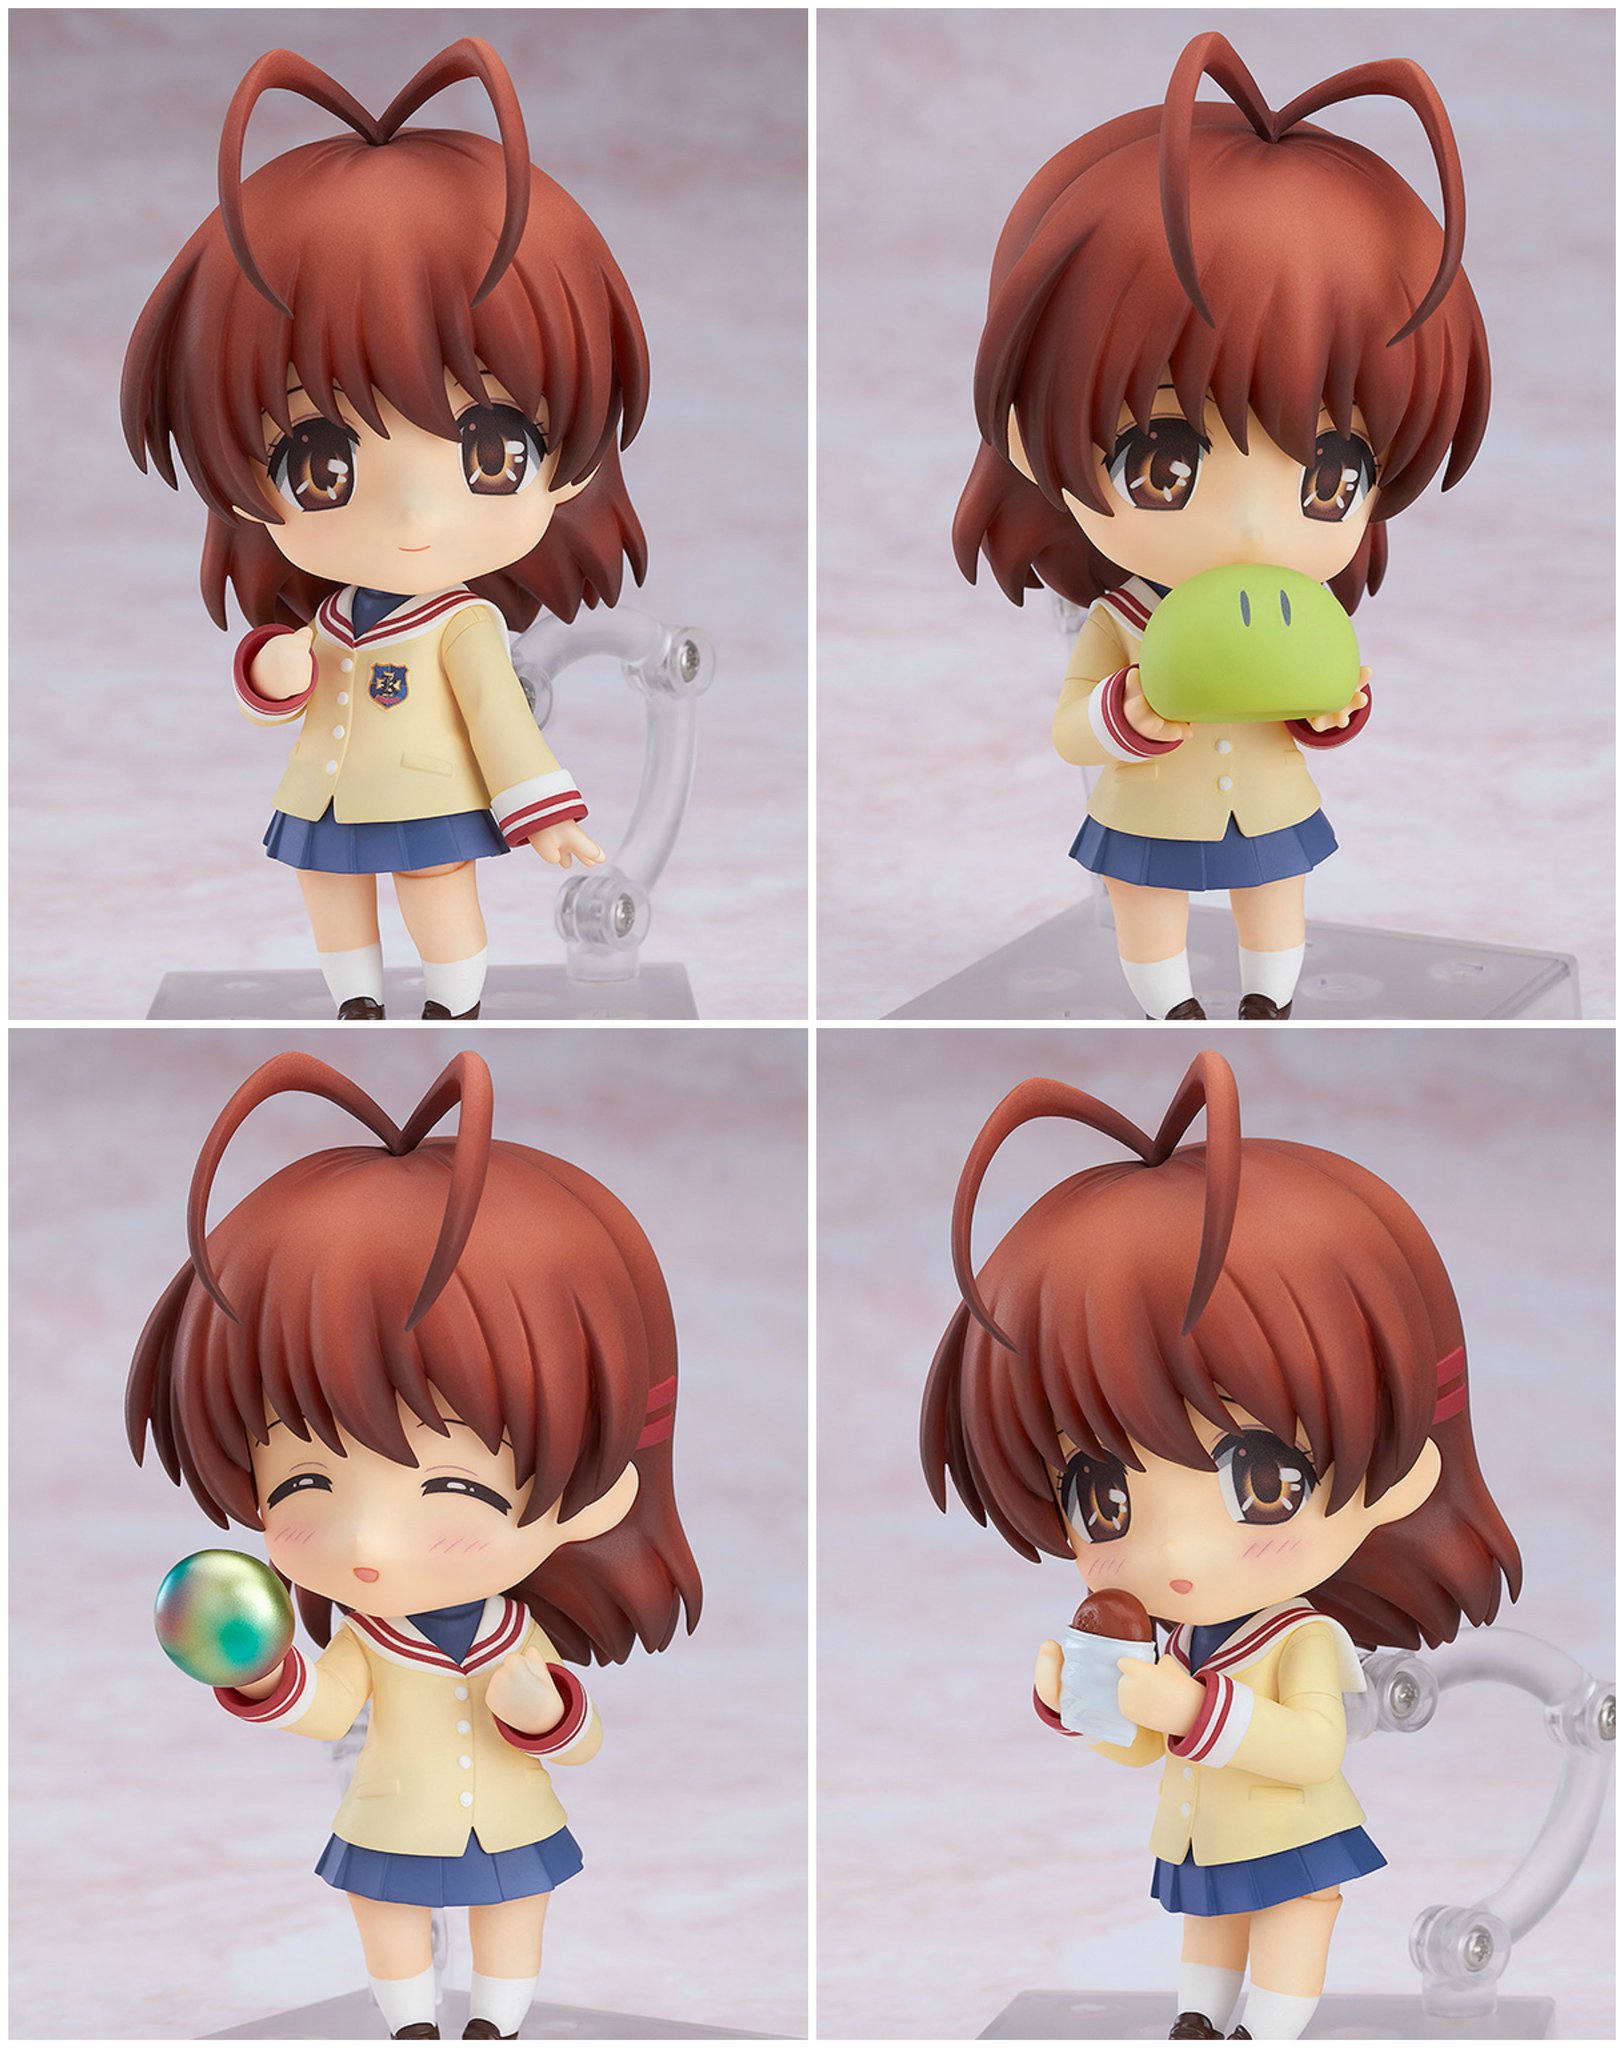 Føde strategi accelerator GoodSmile_US on Twitter: "[PRE-ORDER] Nendoroid Nagisa Furukawa #CLANNAD ▷  https://t.co/qsTg4d9QtP “Fun things. Happy things. They'll all eventually  change someday, you know? But can you still love this place?” -- From the  masterpiece